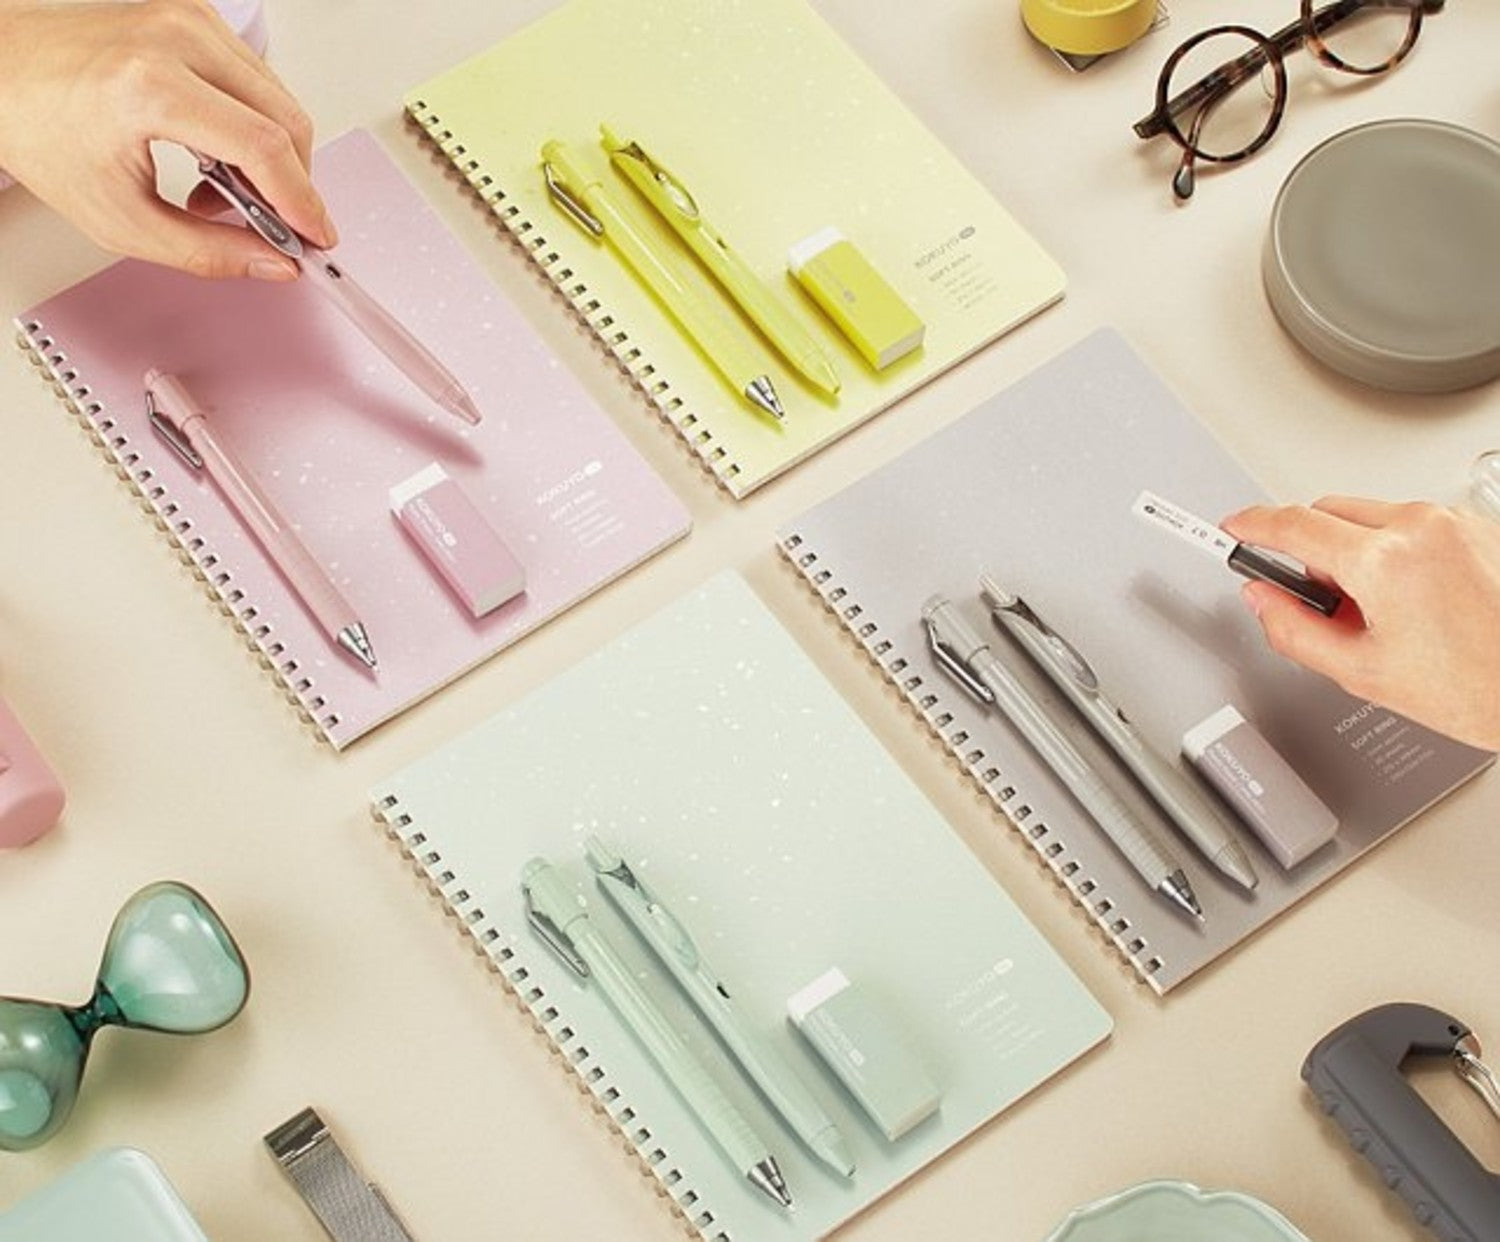 Fall in Love With Japanese Stationery at KOKUYO